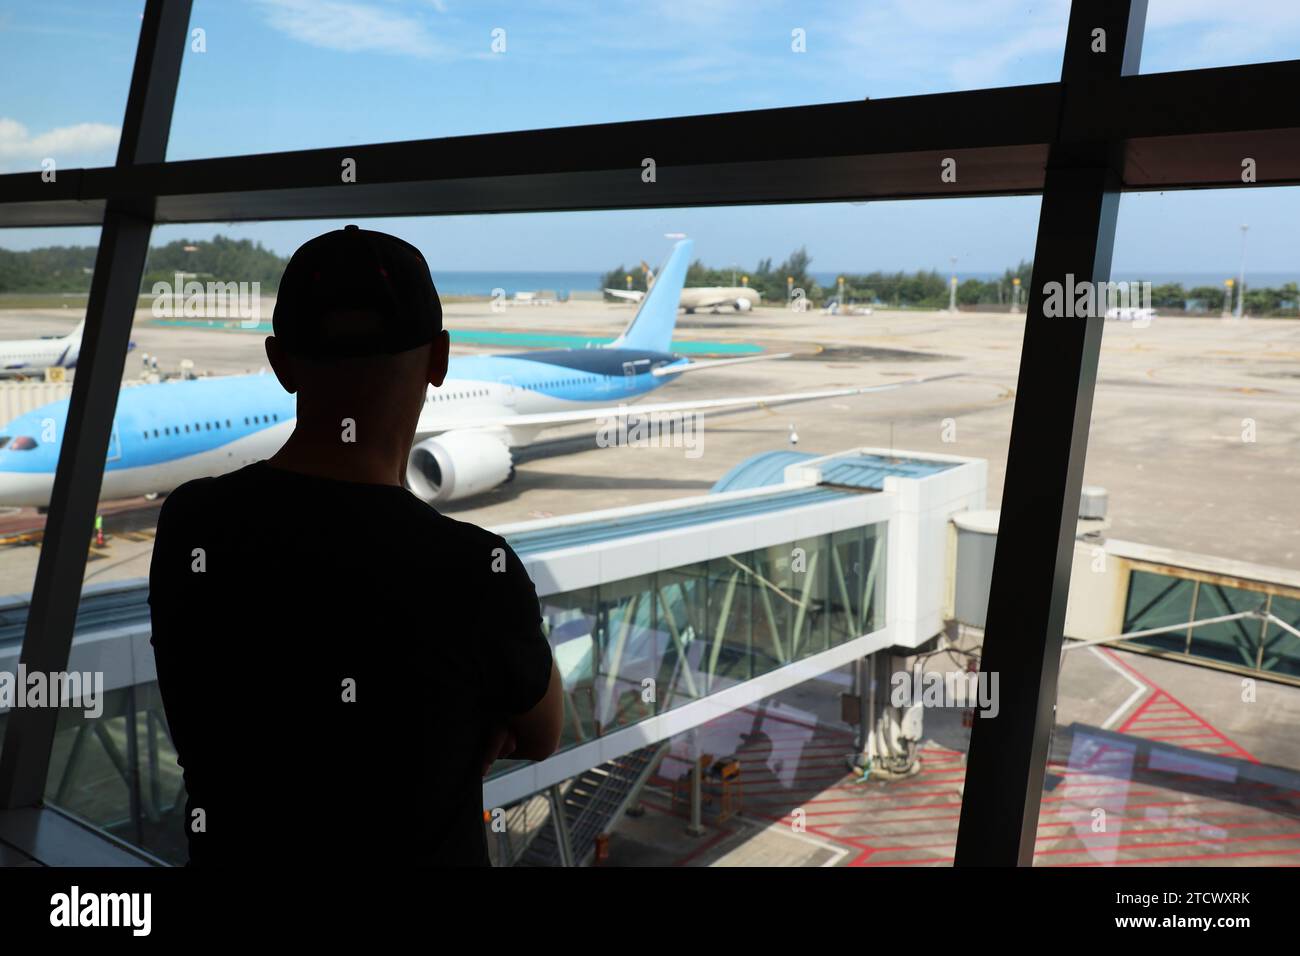 Passenger in airport, silhouette of a man looking at the plane on the tarmac through the glass. Vacation and travel to sea coast Stock Photo